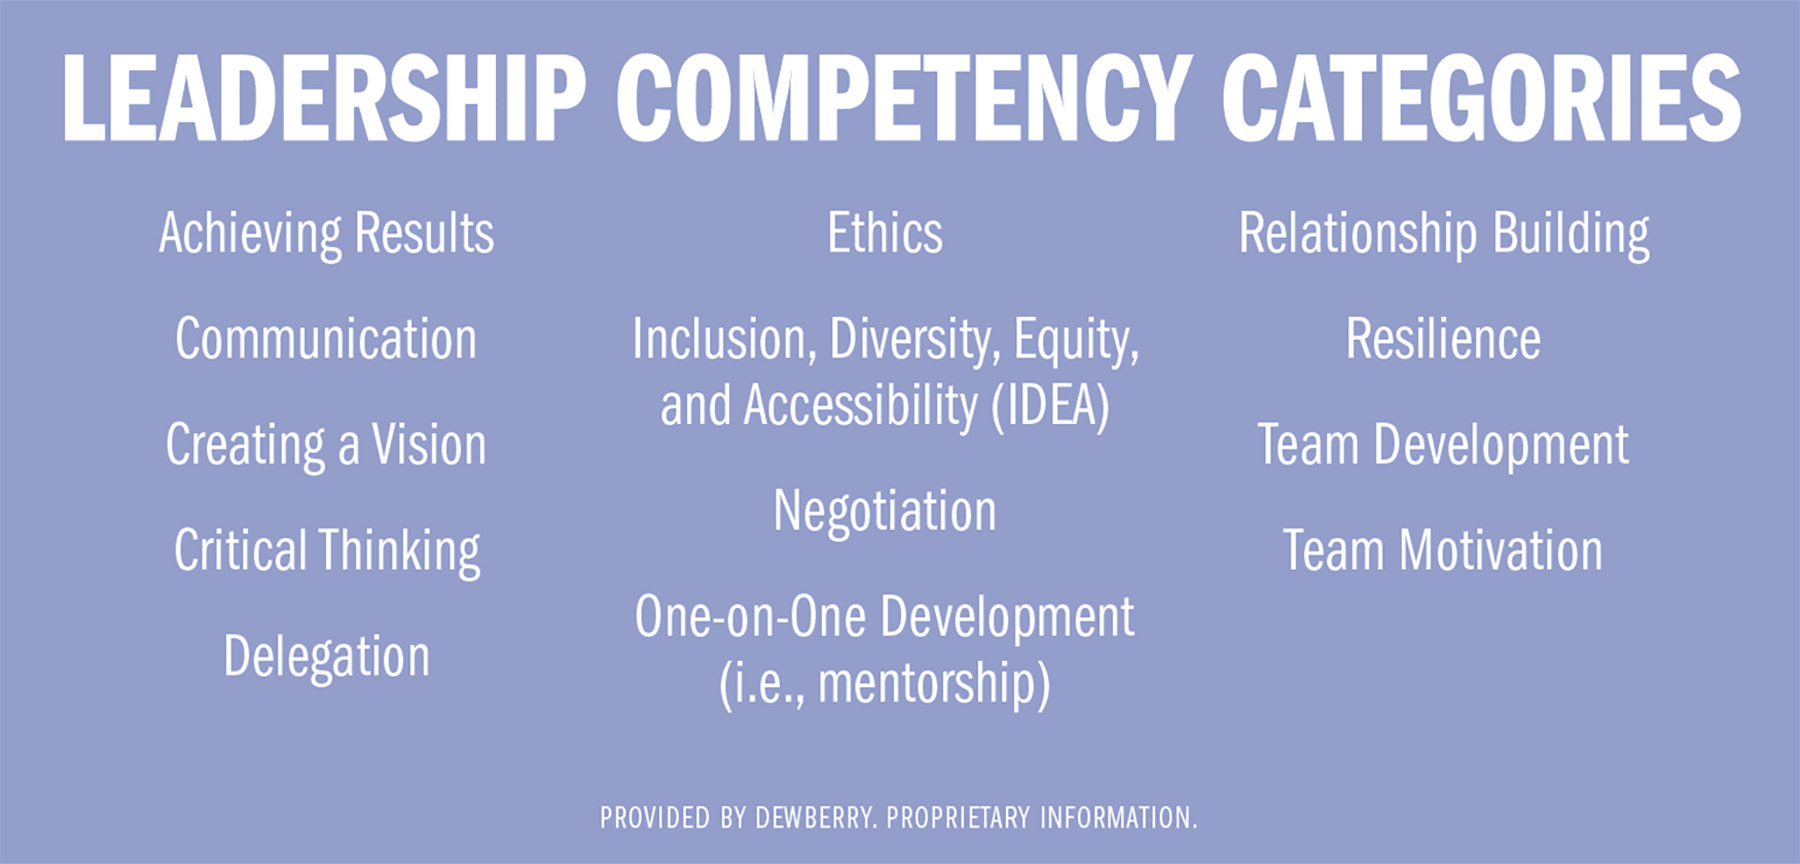 A sidebar lists 13 leadership competency categories. 